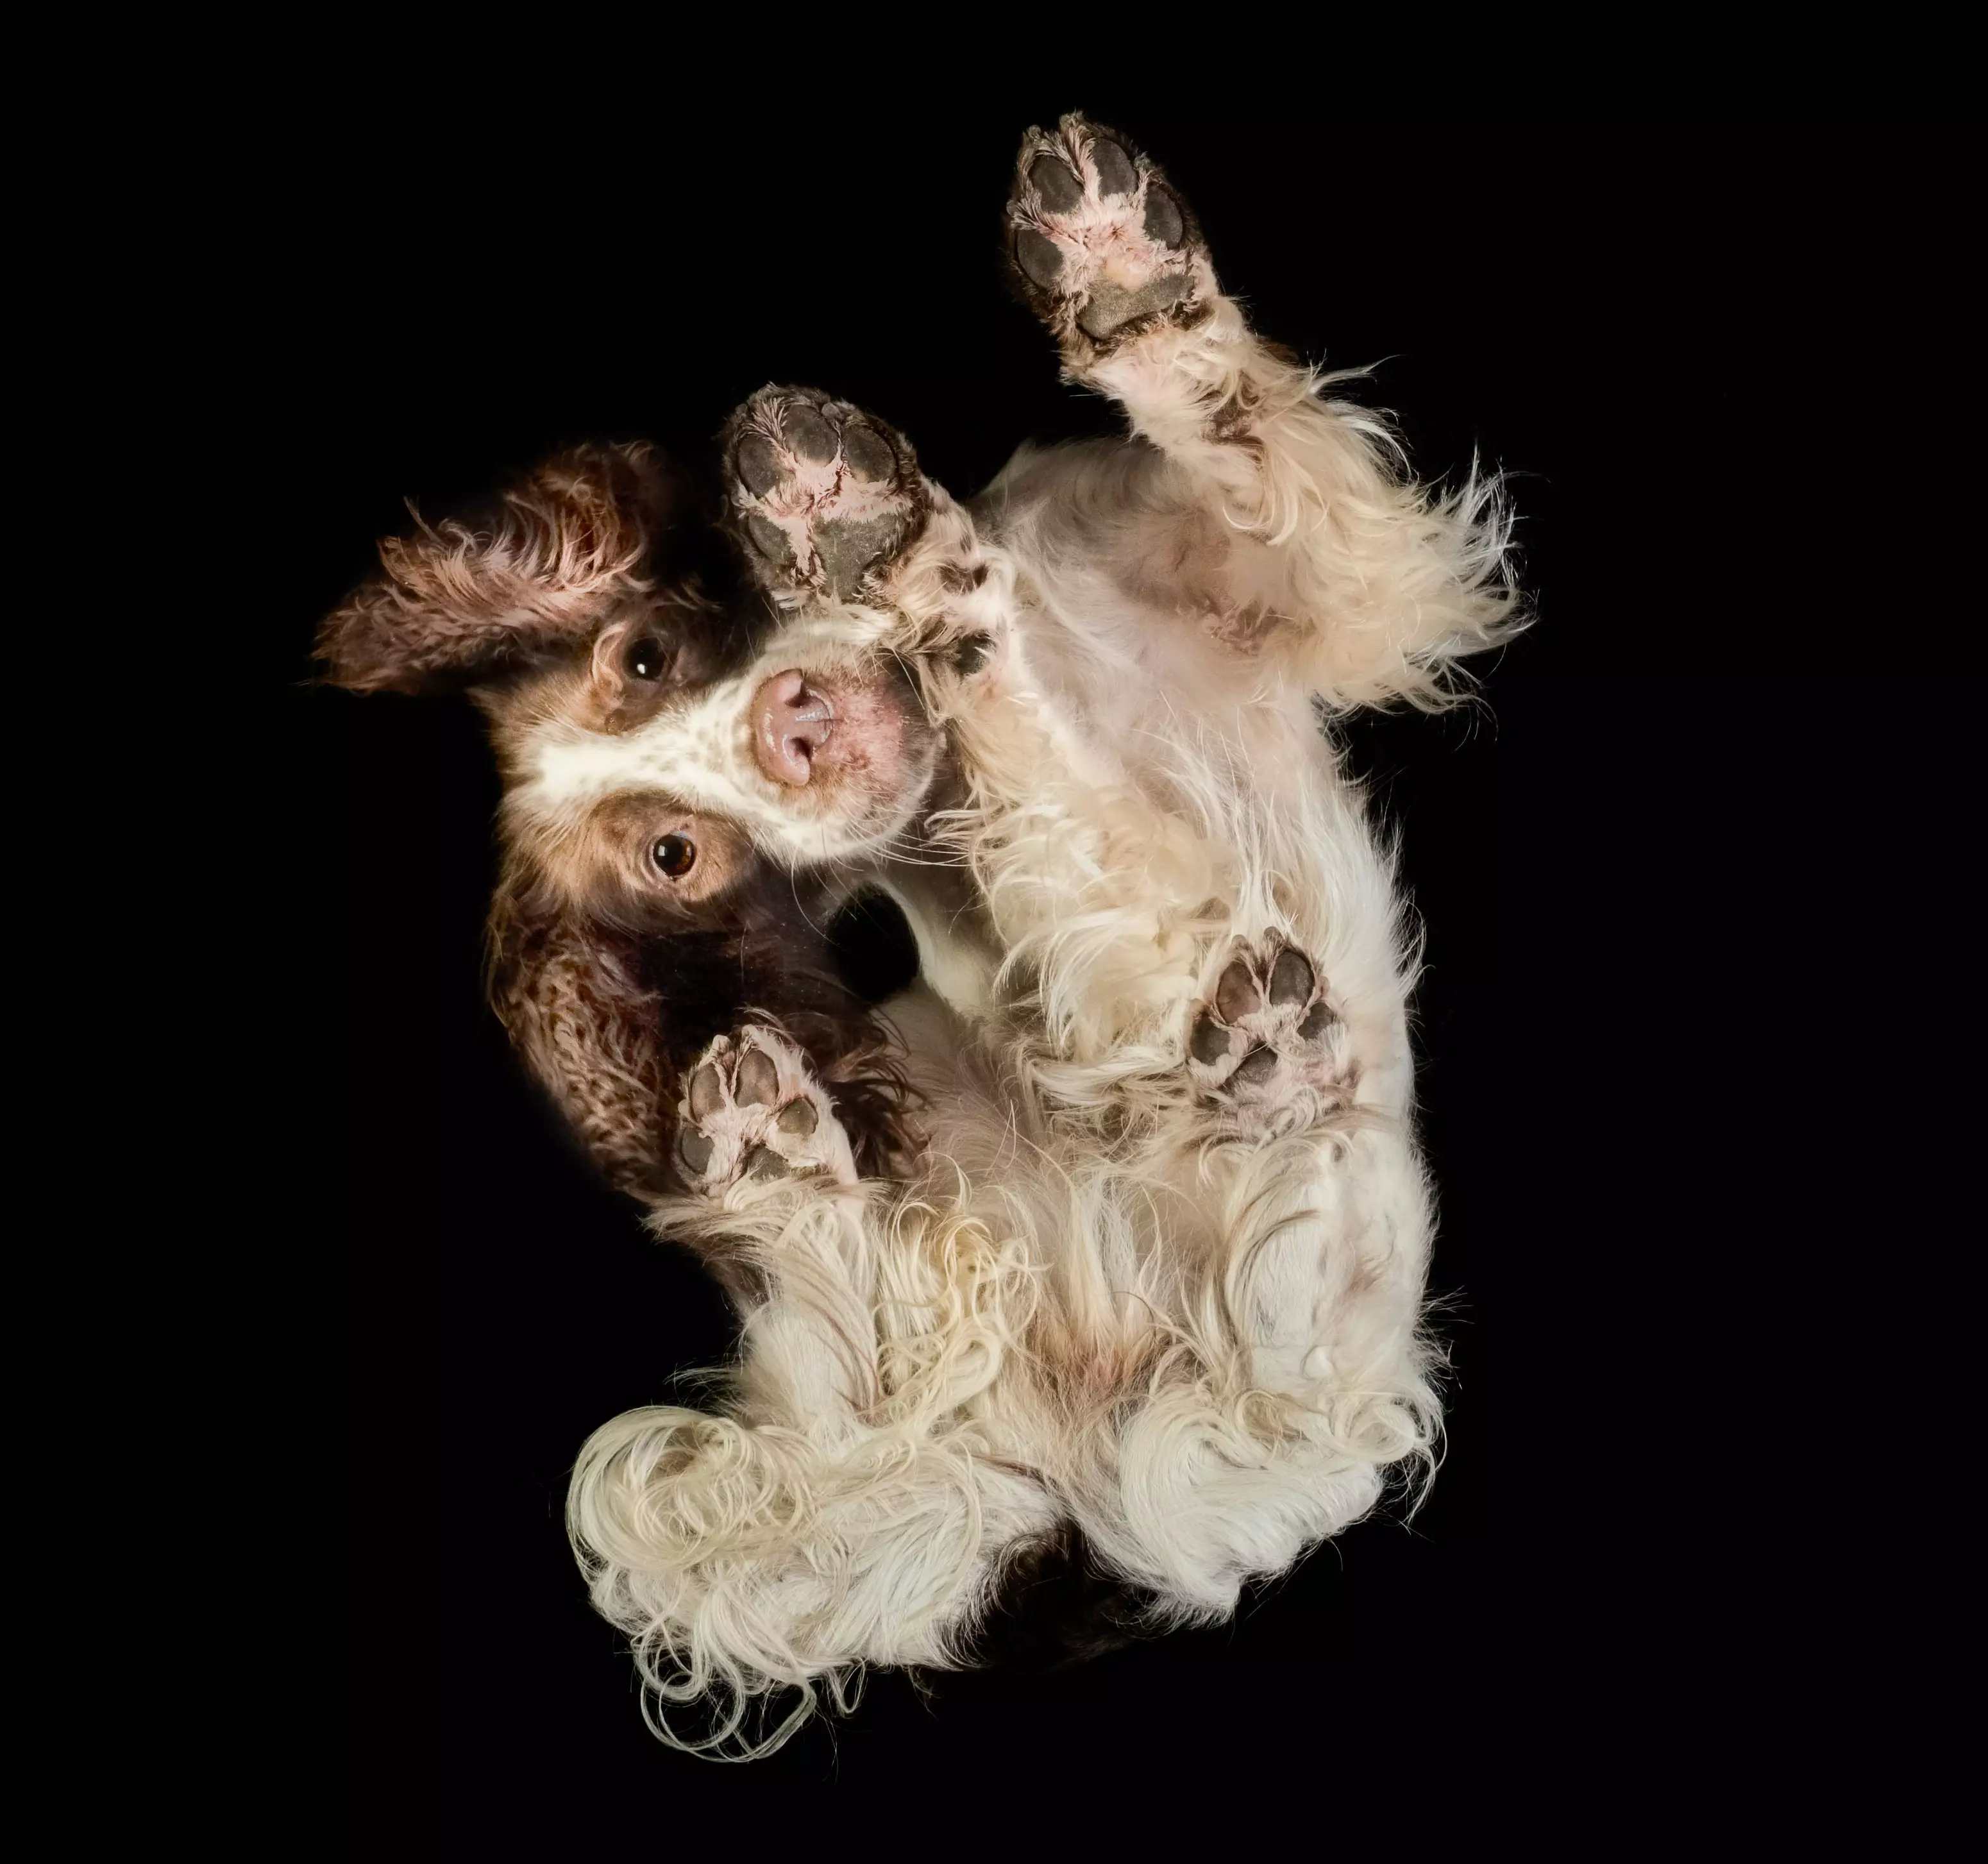 The outcome can make some dogs look like they're suspended in air or flying, making for unique shots. (